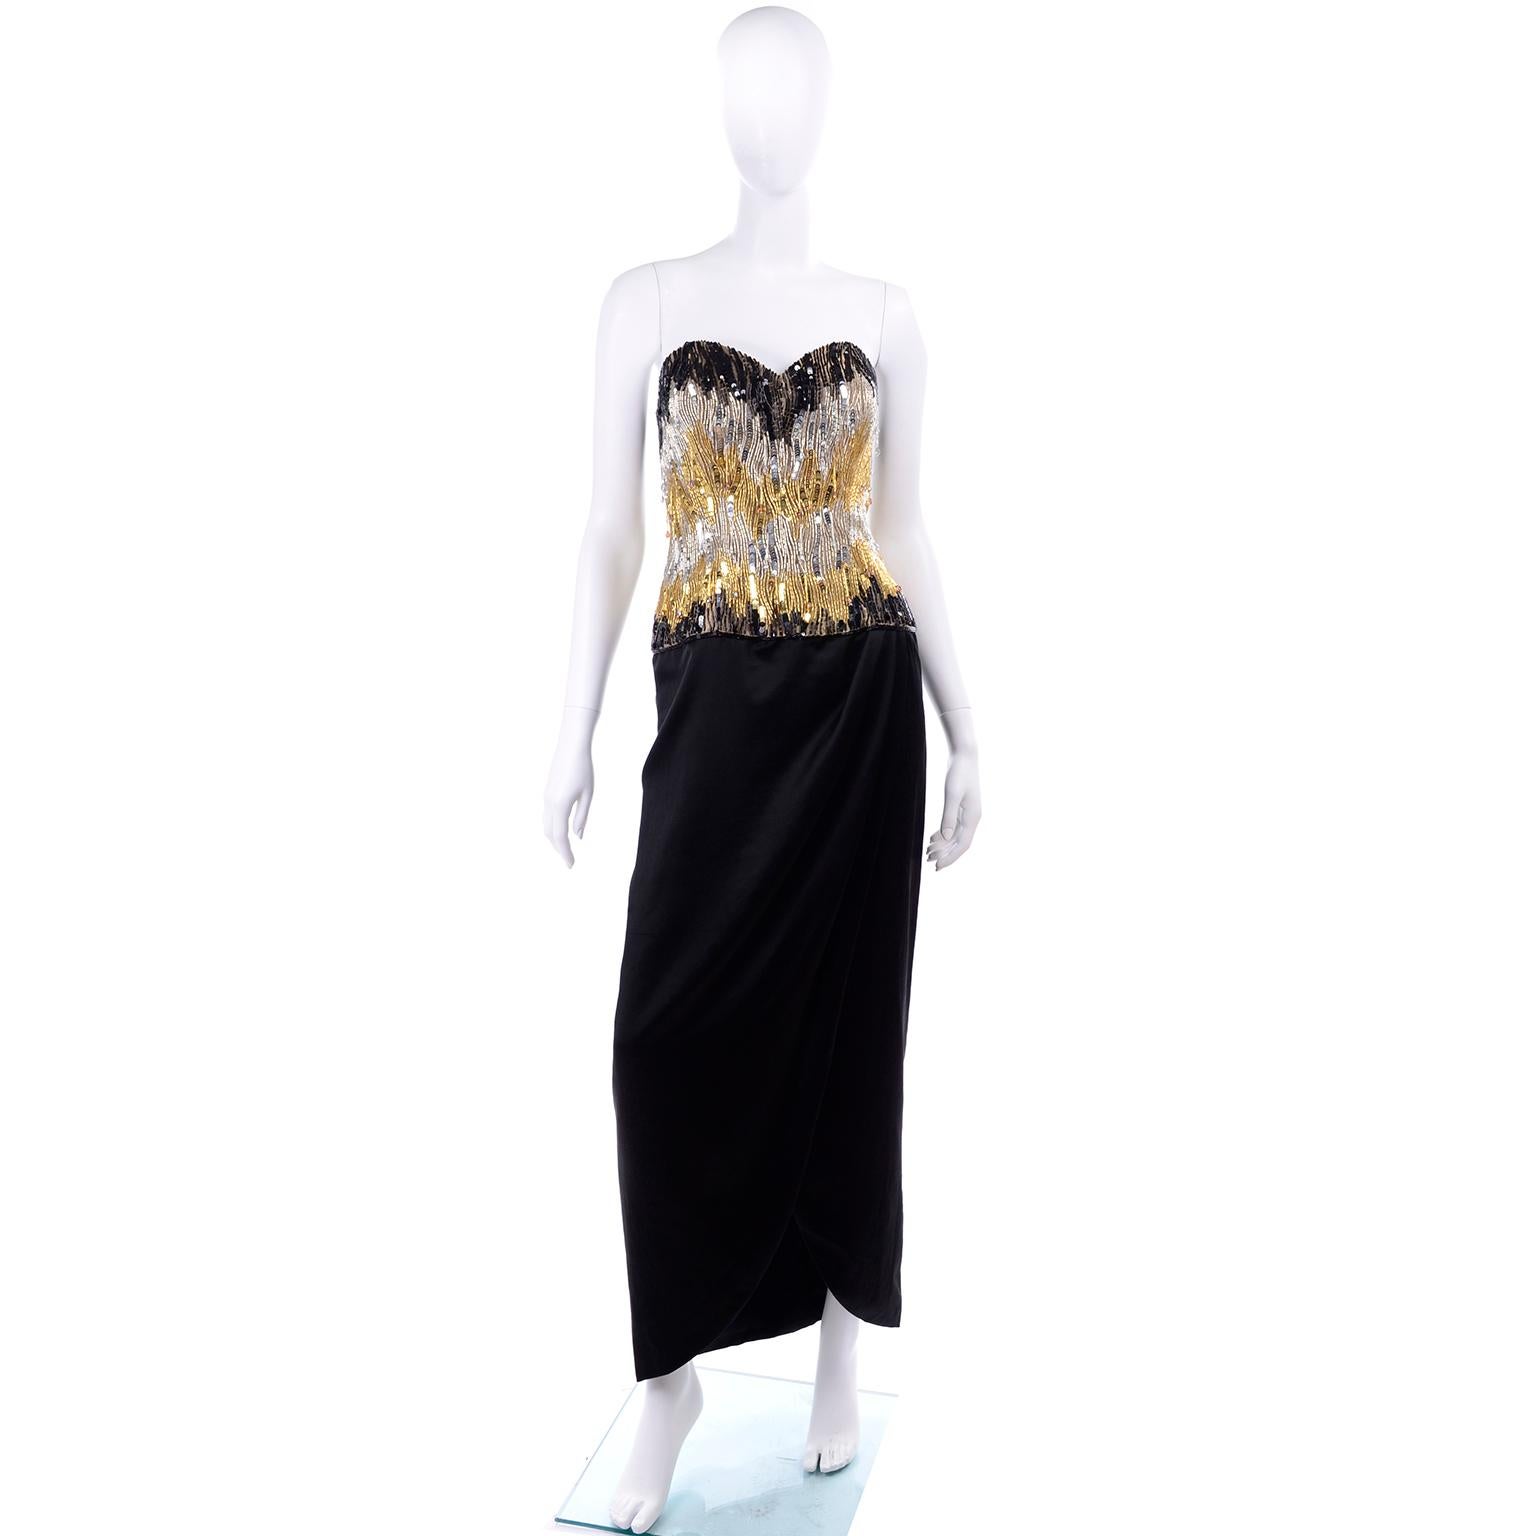 This is a couture quality vintage dress designed by Ann Lawrence in the 1980's. This stunning black, gold and silver evening gown has beads, crystals and sequins on the strapless bodice.  A really gorgeous dress with hanging beaded crystal drops and